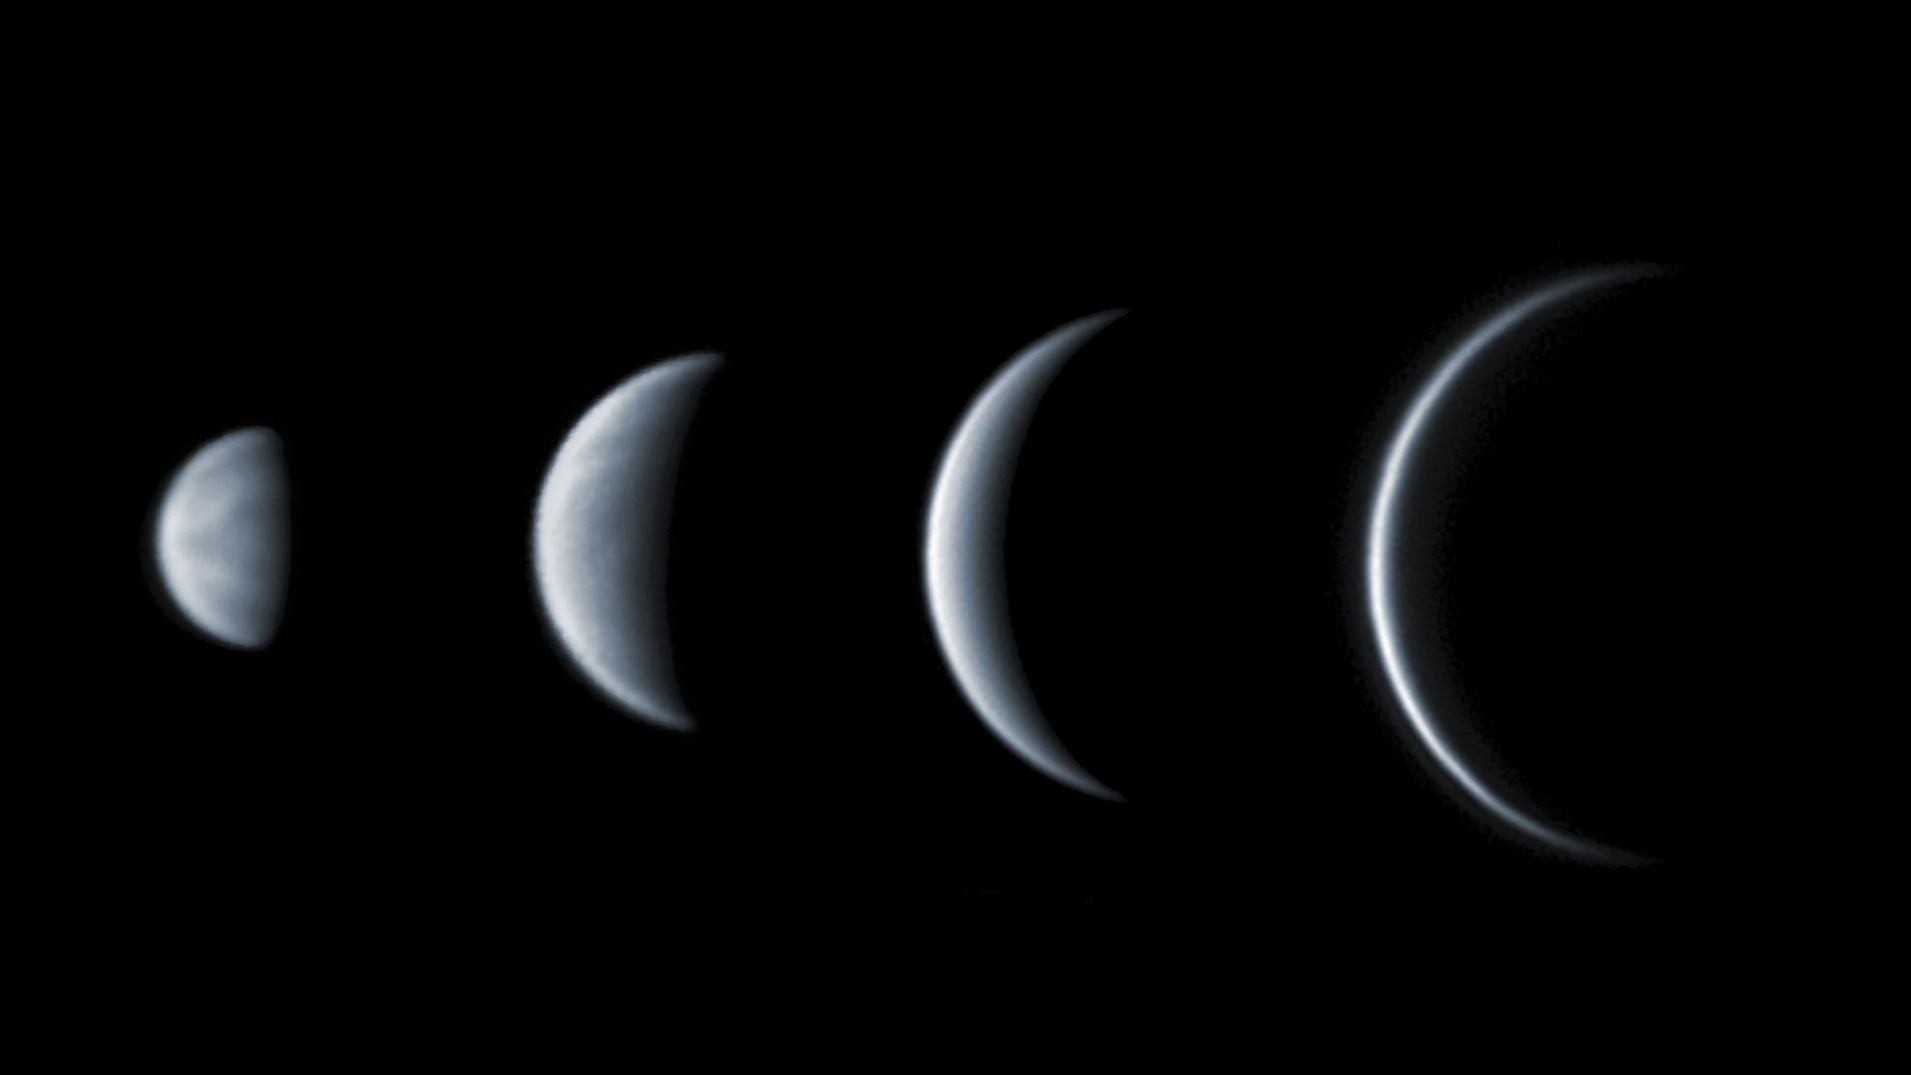 This set of images taken in 2004 show the phases and relative size of Venus as seen from Earth as it moves around the Sun. The images were taken with a 180cm Maksutov Newtonian telescope from Northampton in The UK. (Photo by Jamie Cooper/SSPL/Getty Images)